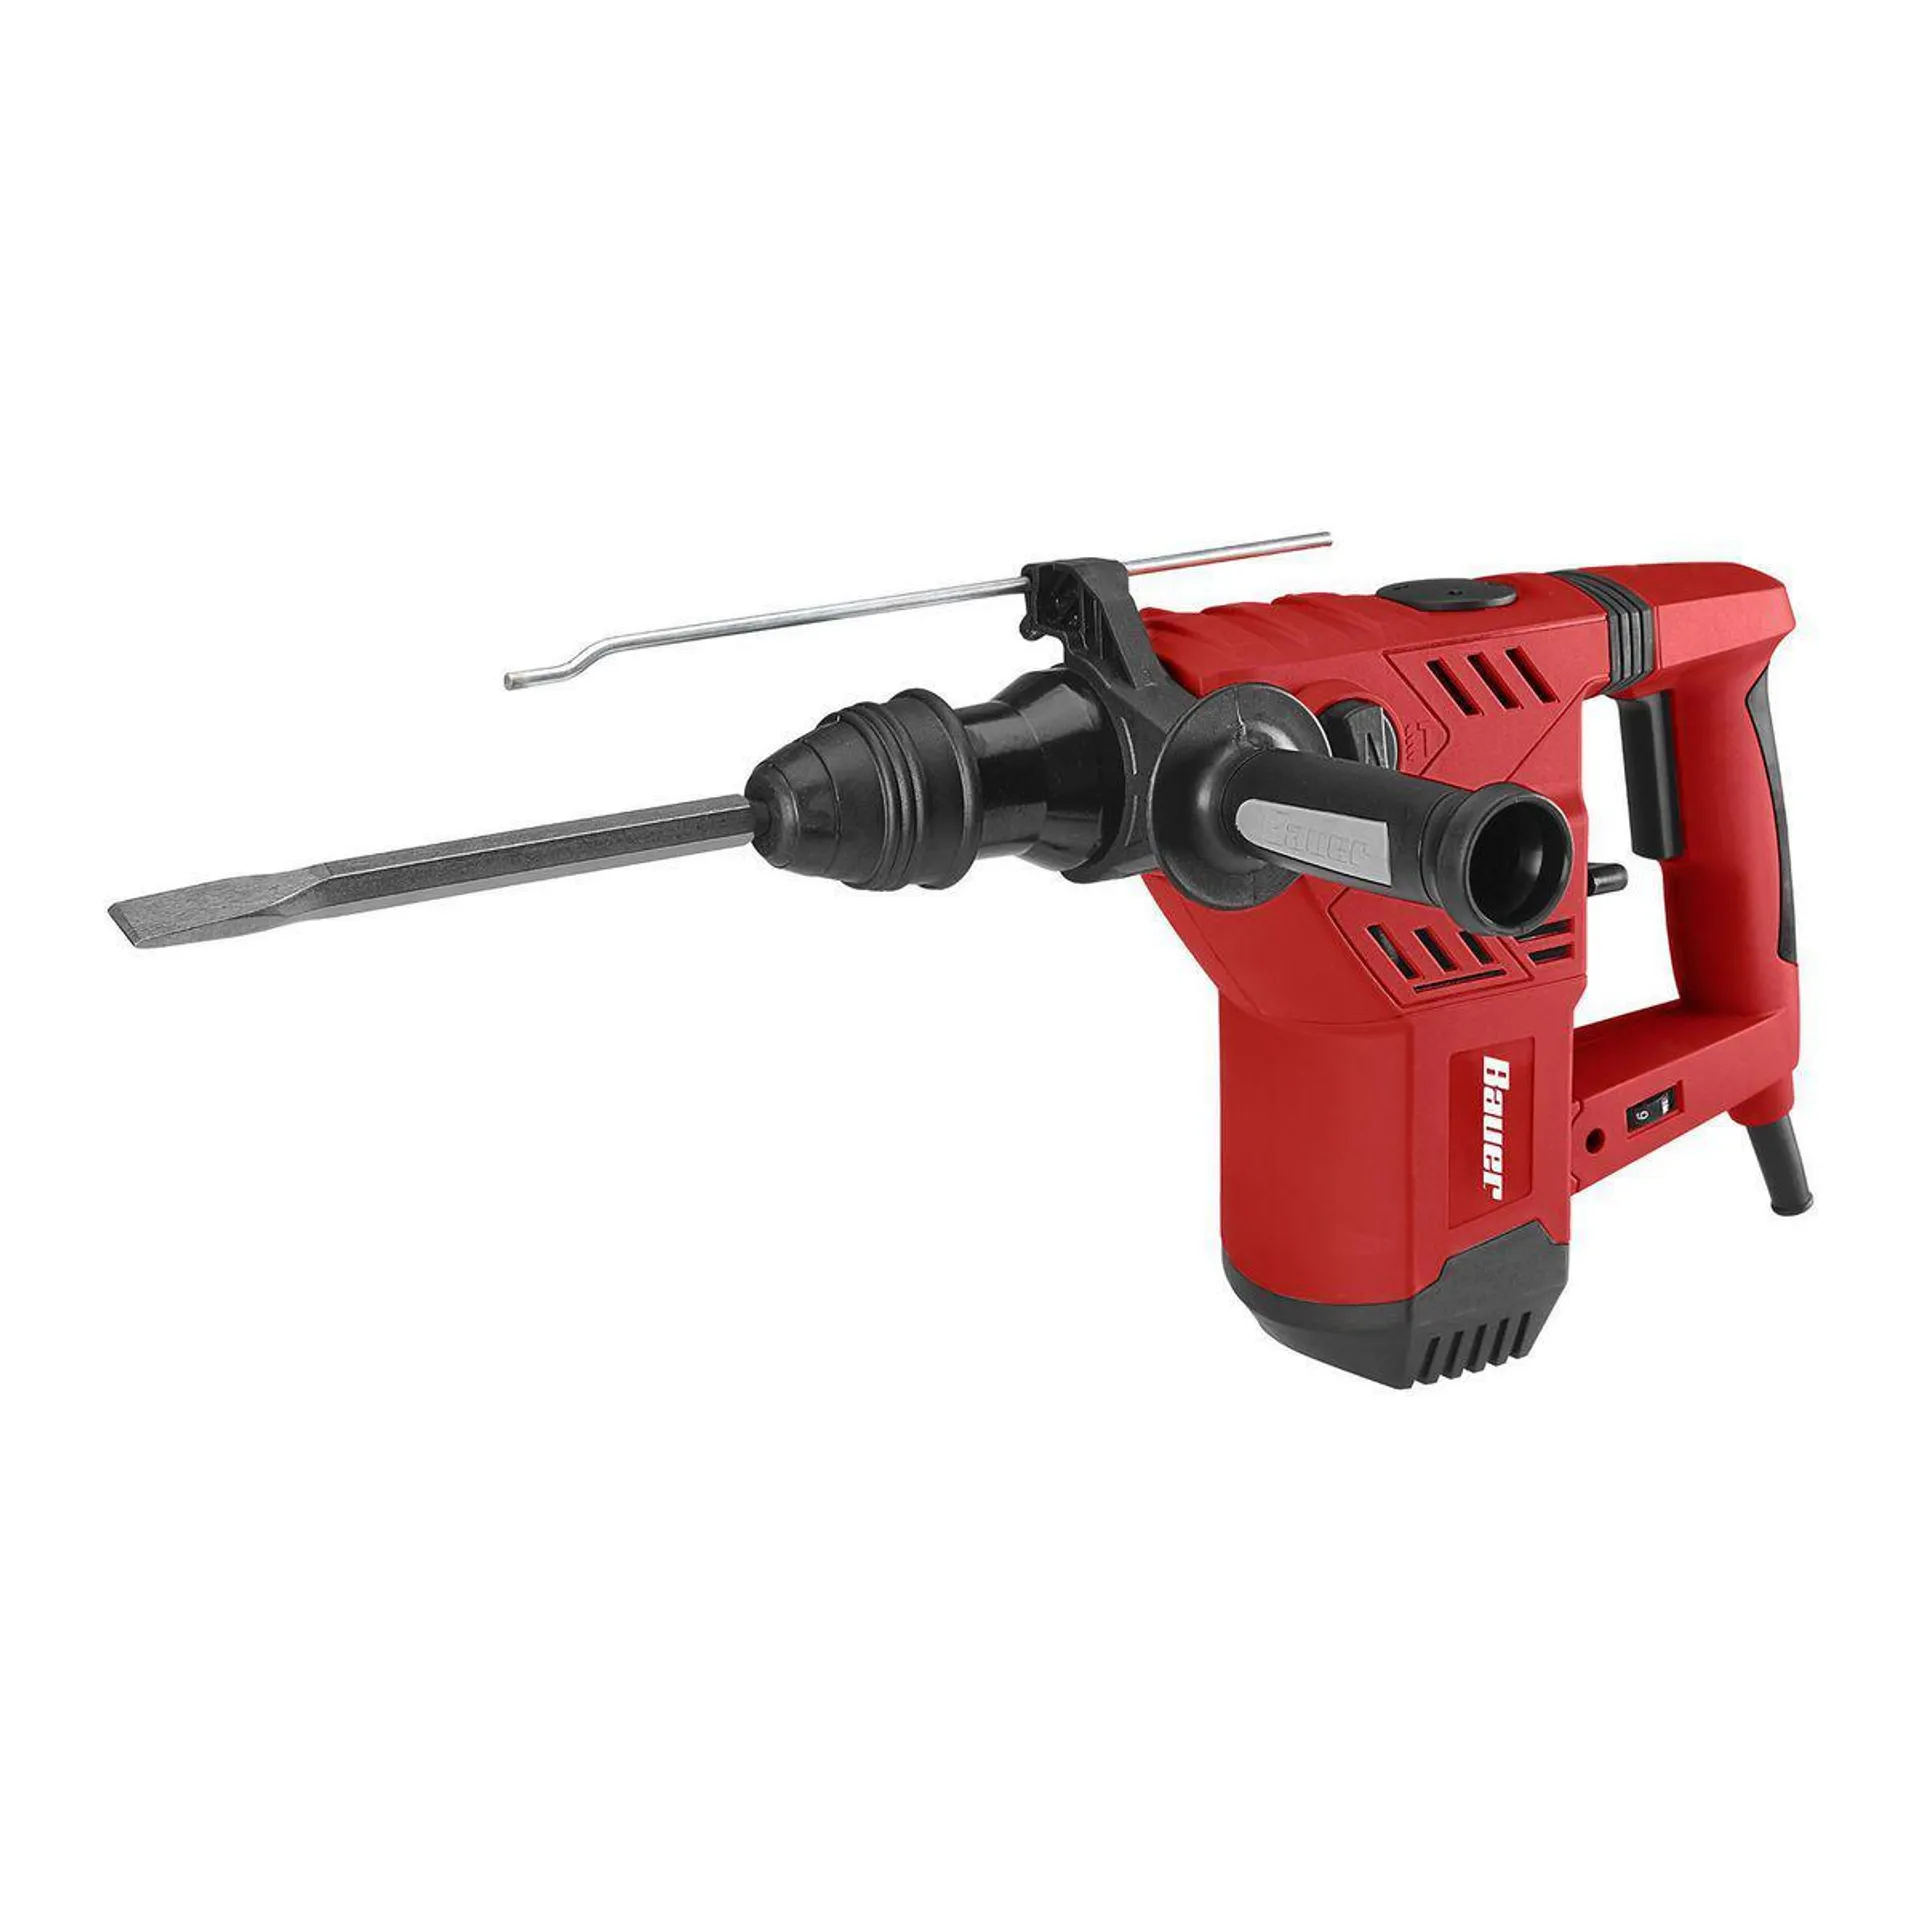 10 Amp 1-1/8 in. SDS Type Variable Speed Rotary Hammer